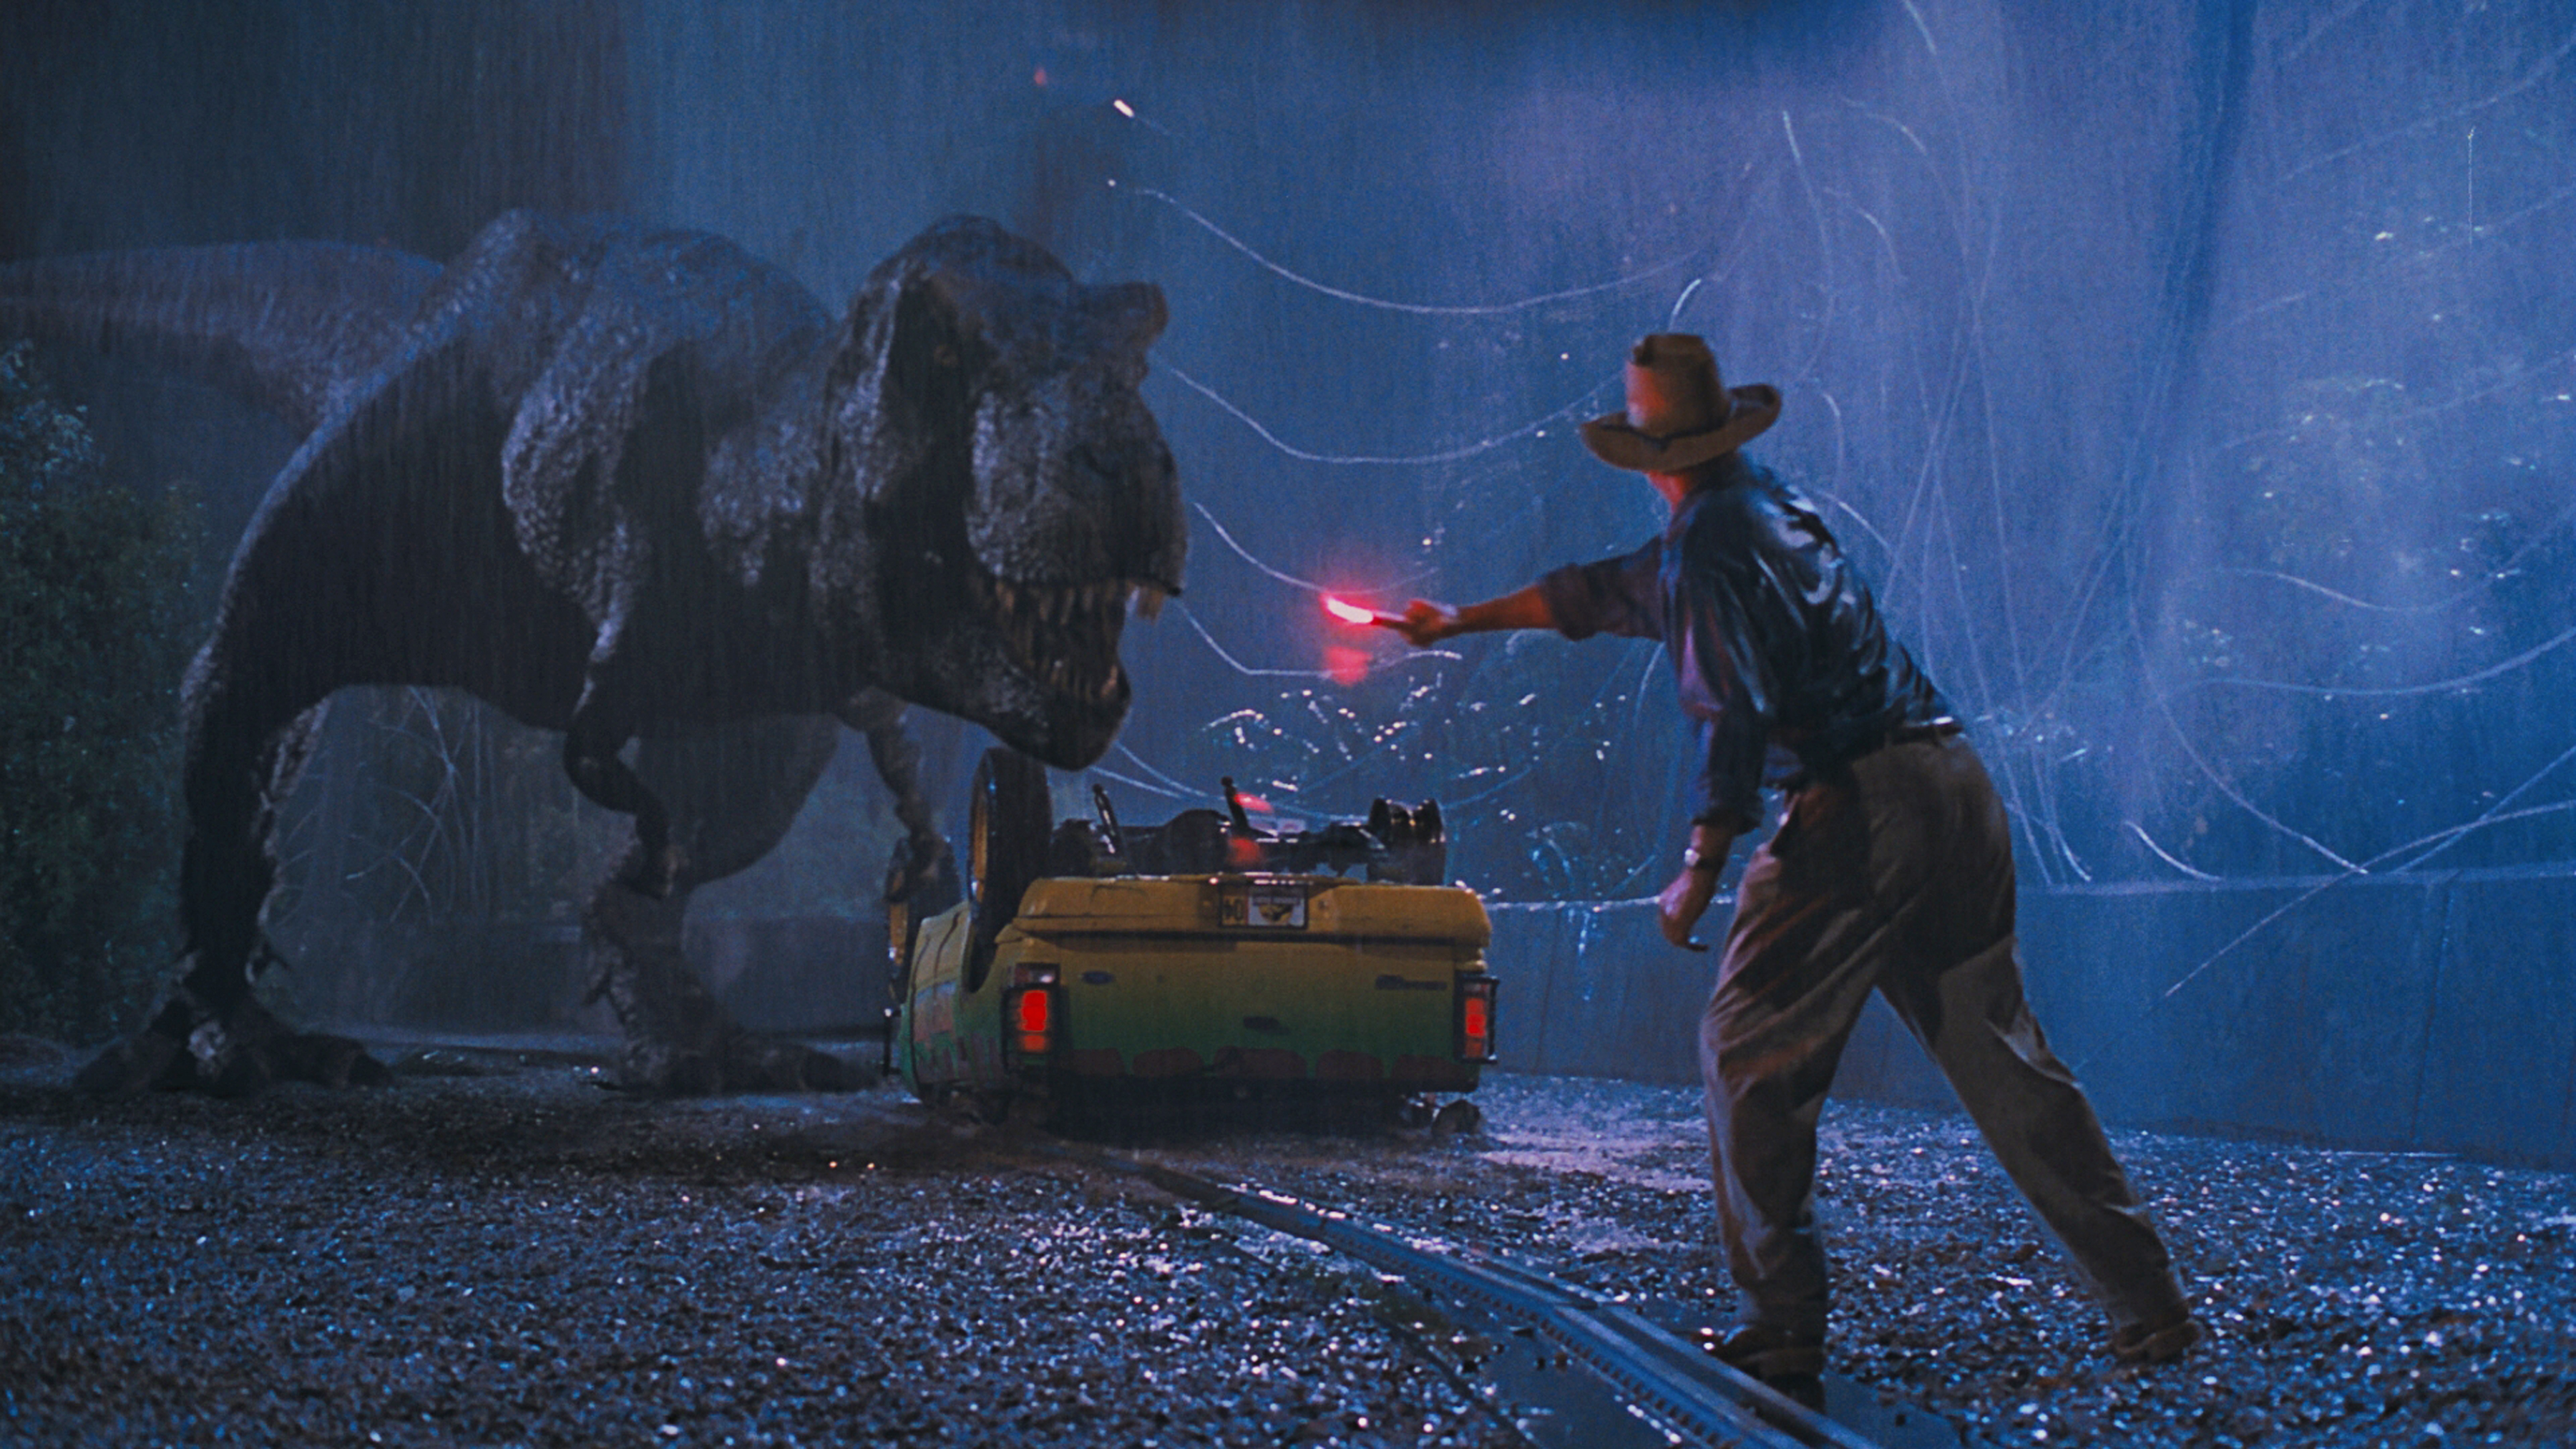 <p>Even though the cars in <i>Jurassic Park</i> appear to be Jeeps, they're actually Ford Explorers. While the Touring Vehicles didn't see much off-roading, they're an integral part of the movie's experience. The cars were modified for the illusion of having fully-automated driving. The actual driver hid in the vehicle's trunk, where they watched a small TV that was fed outside images through two cameras.</p> <p>Only six cars were used in the film as they were charged at, stomped on, flipped over, and buffeted around by prehistoric dinosaurs. Three dumpsters full of car parts were hauled away at the end of filming.</p>